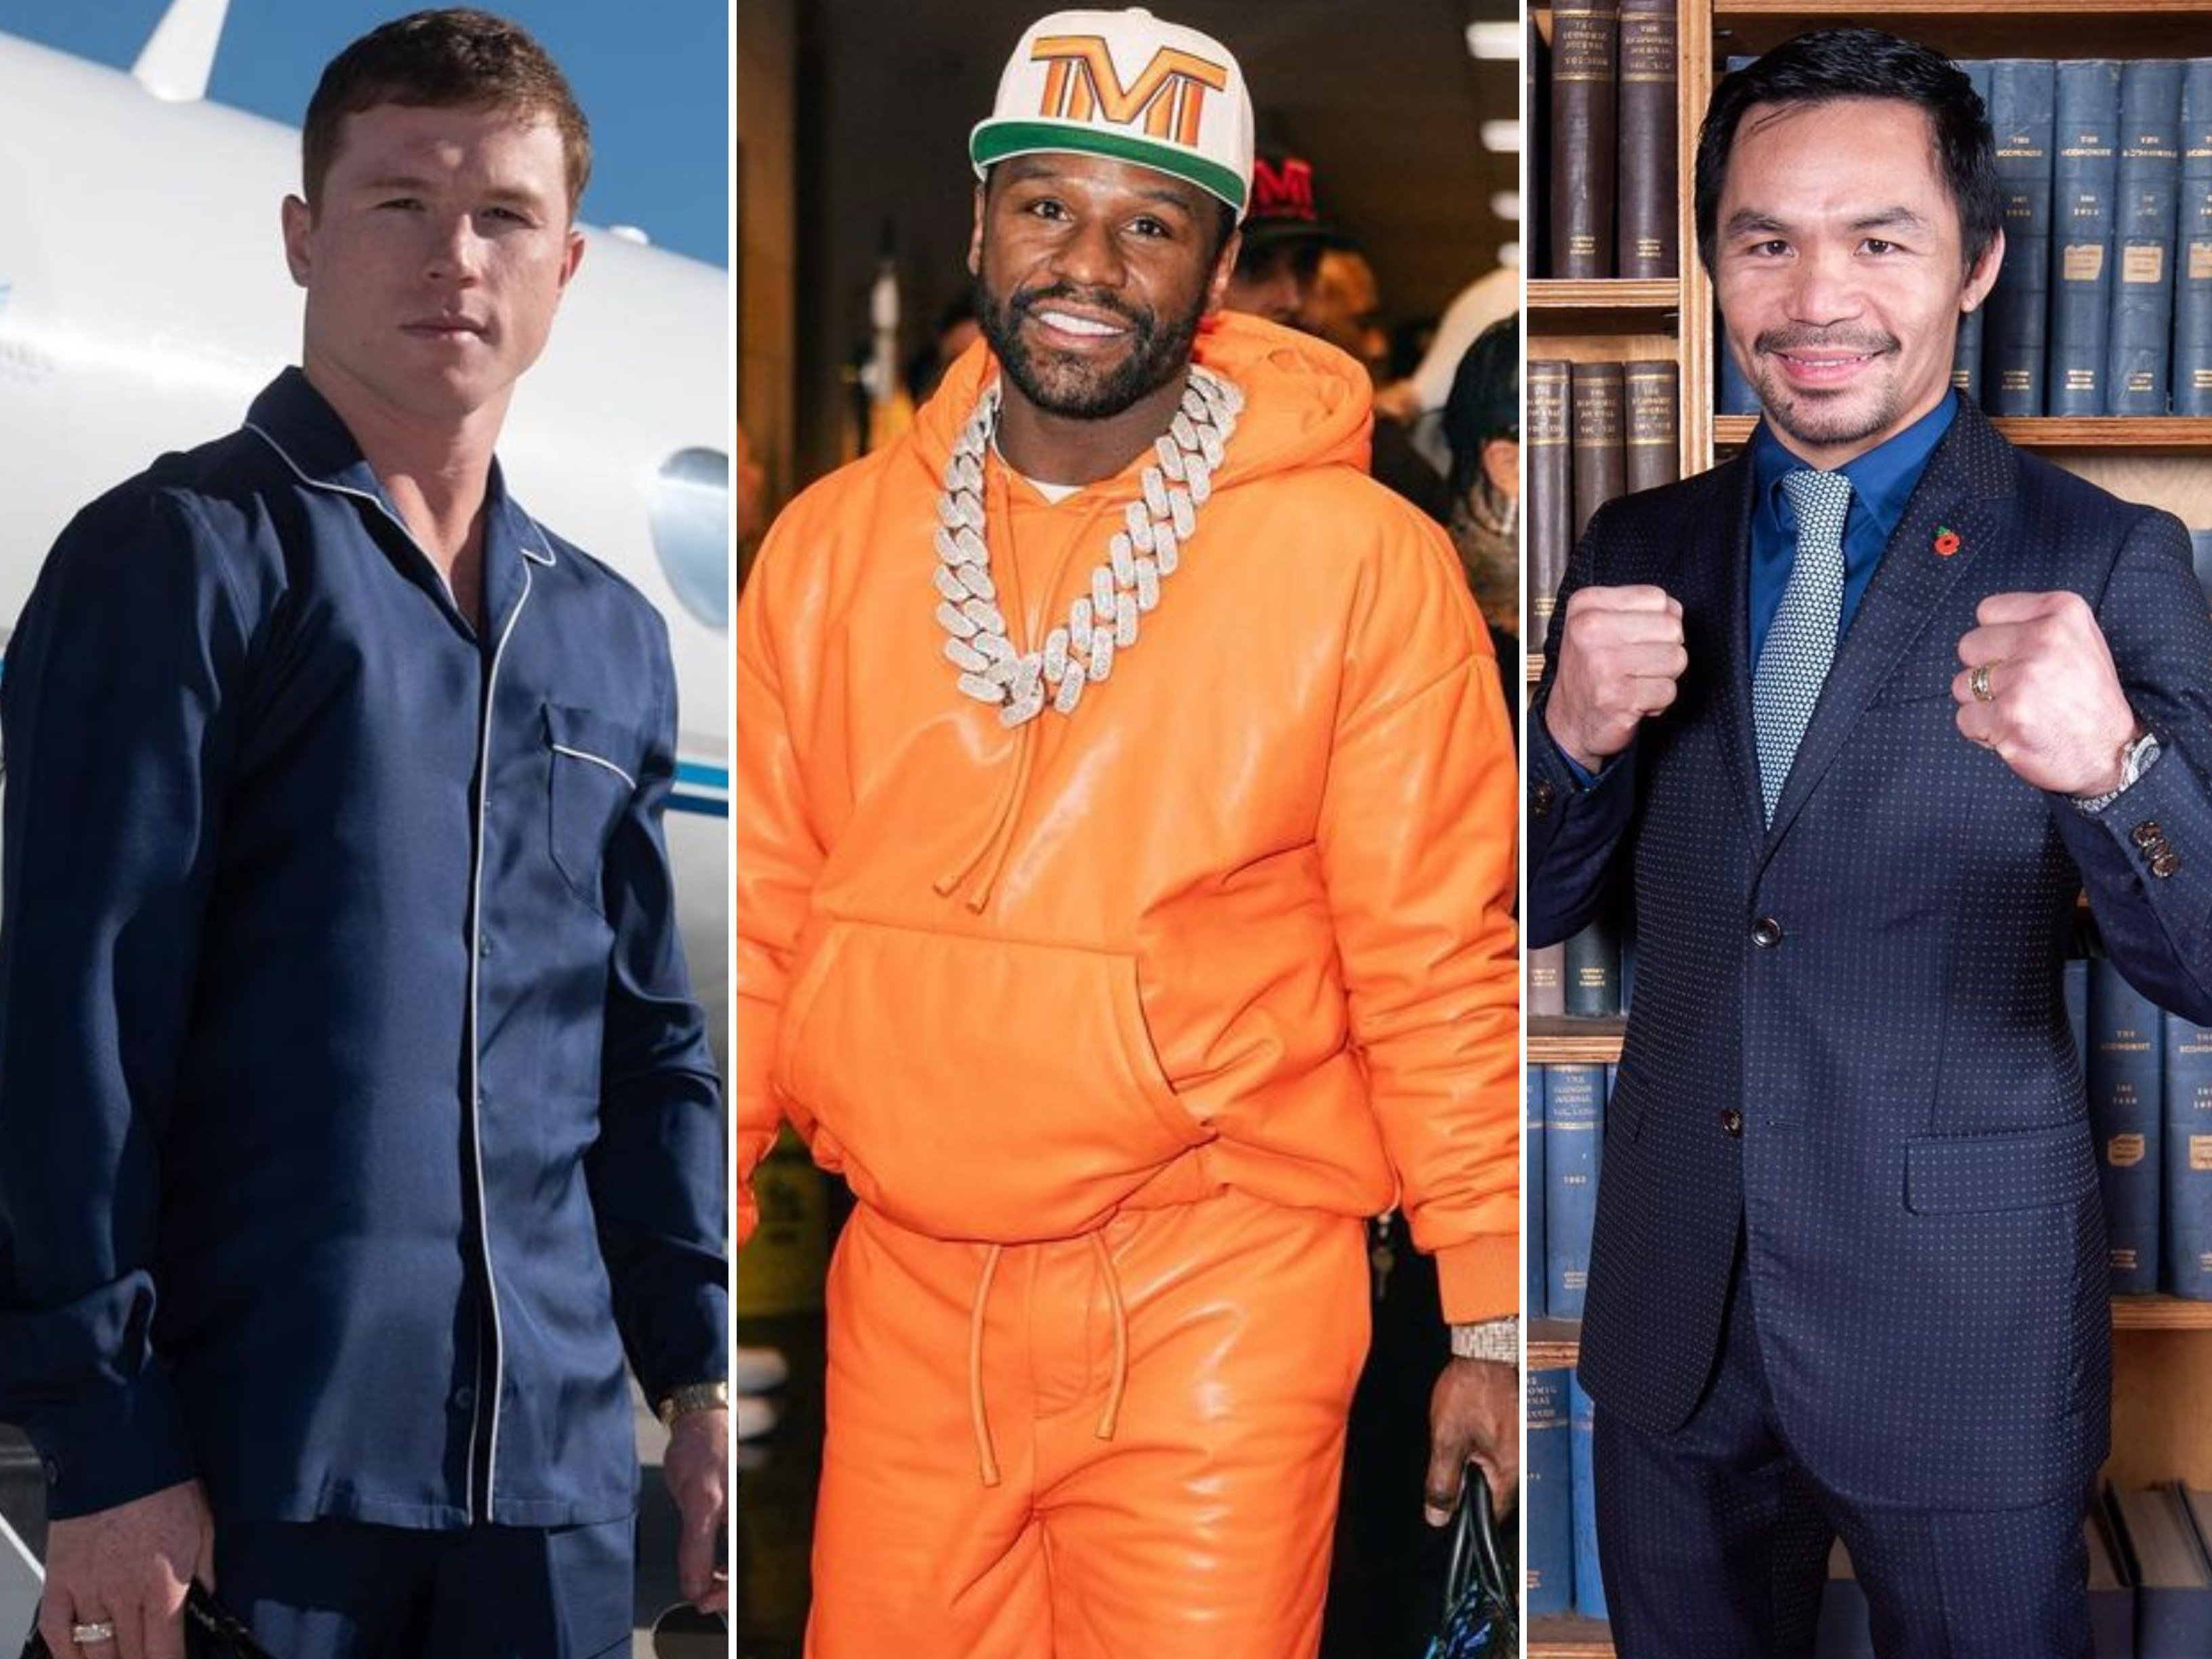 Who are the world’s richest boxers? Manny Pacquiao, Floyd Mayweather and Canelo all make the list. Photos: @canelo, @floydmayweather, @mannypacquiao/Instagram